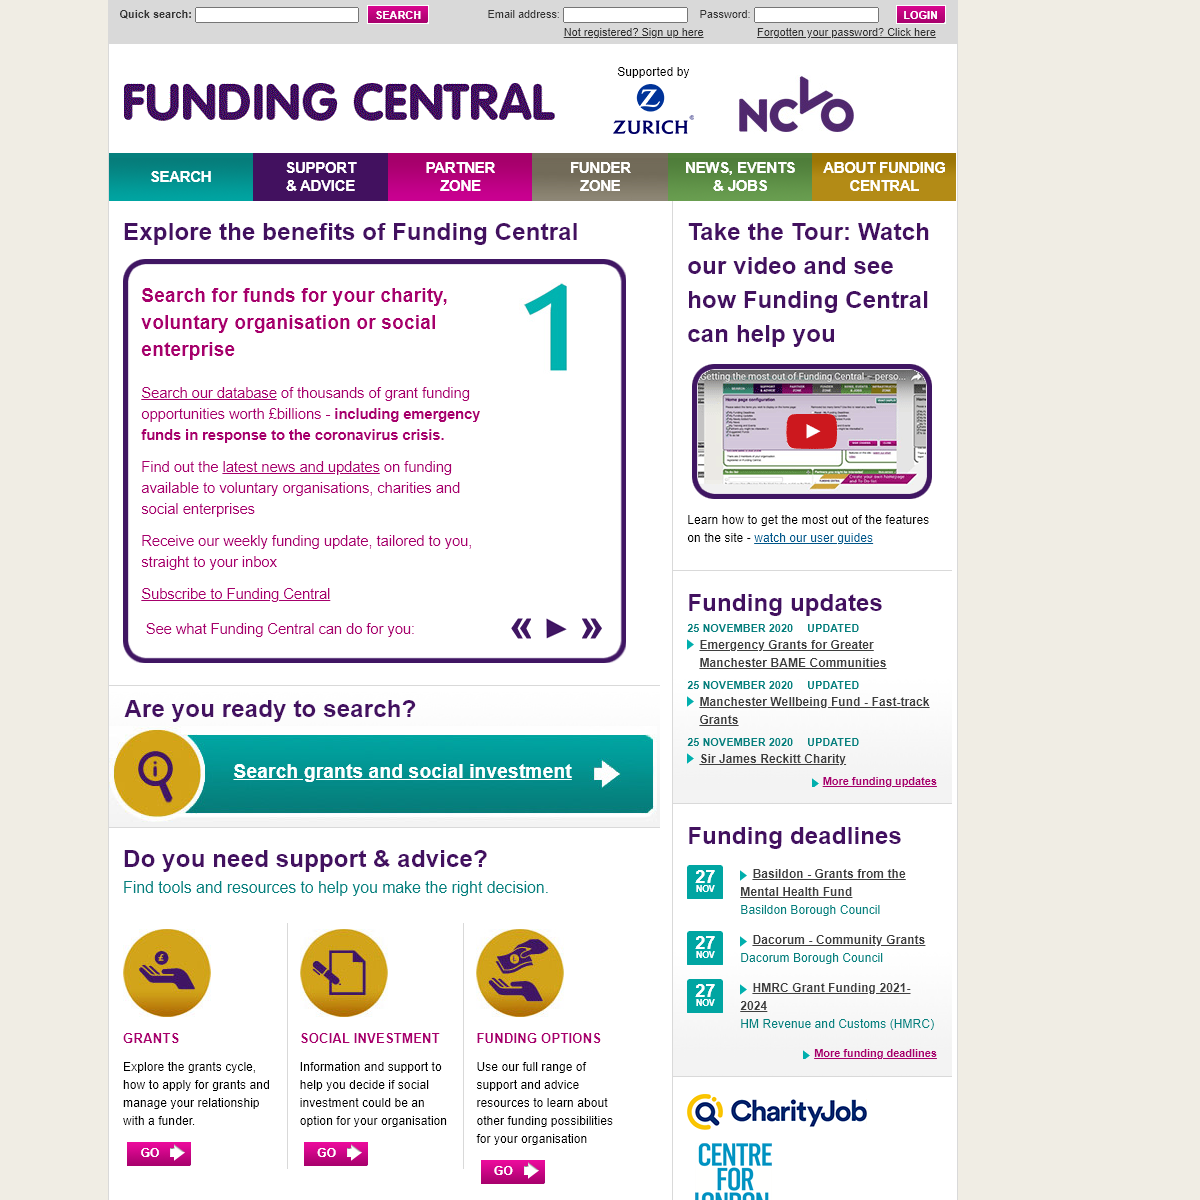 A complete backup of fundingcentral.org.uk